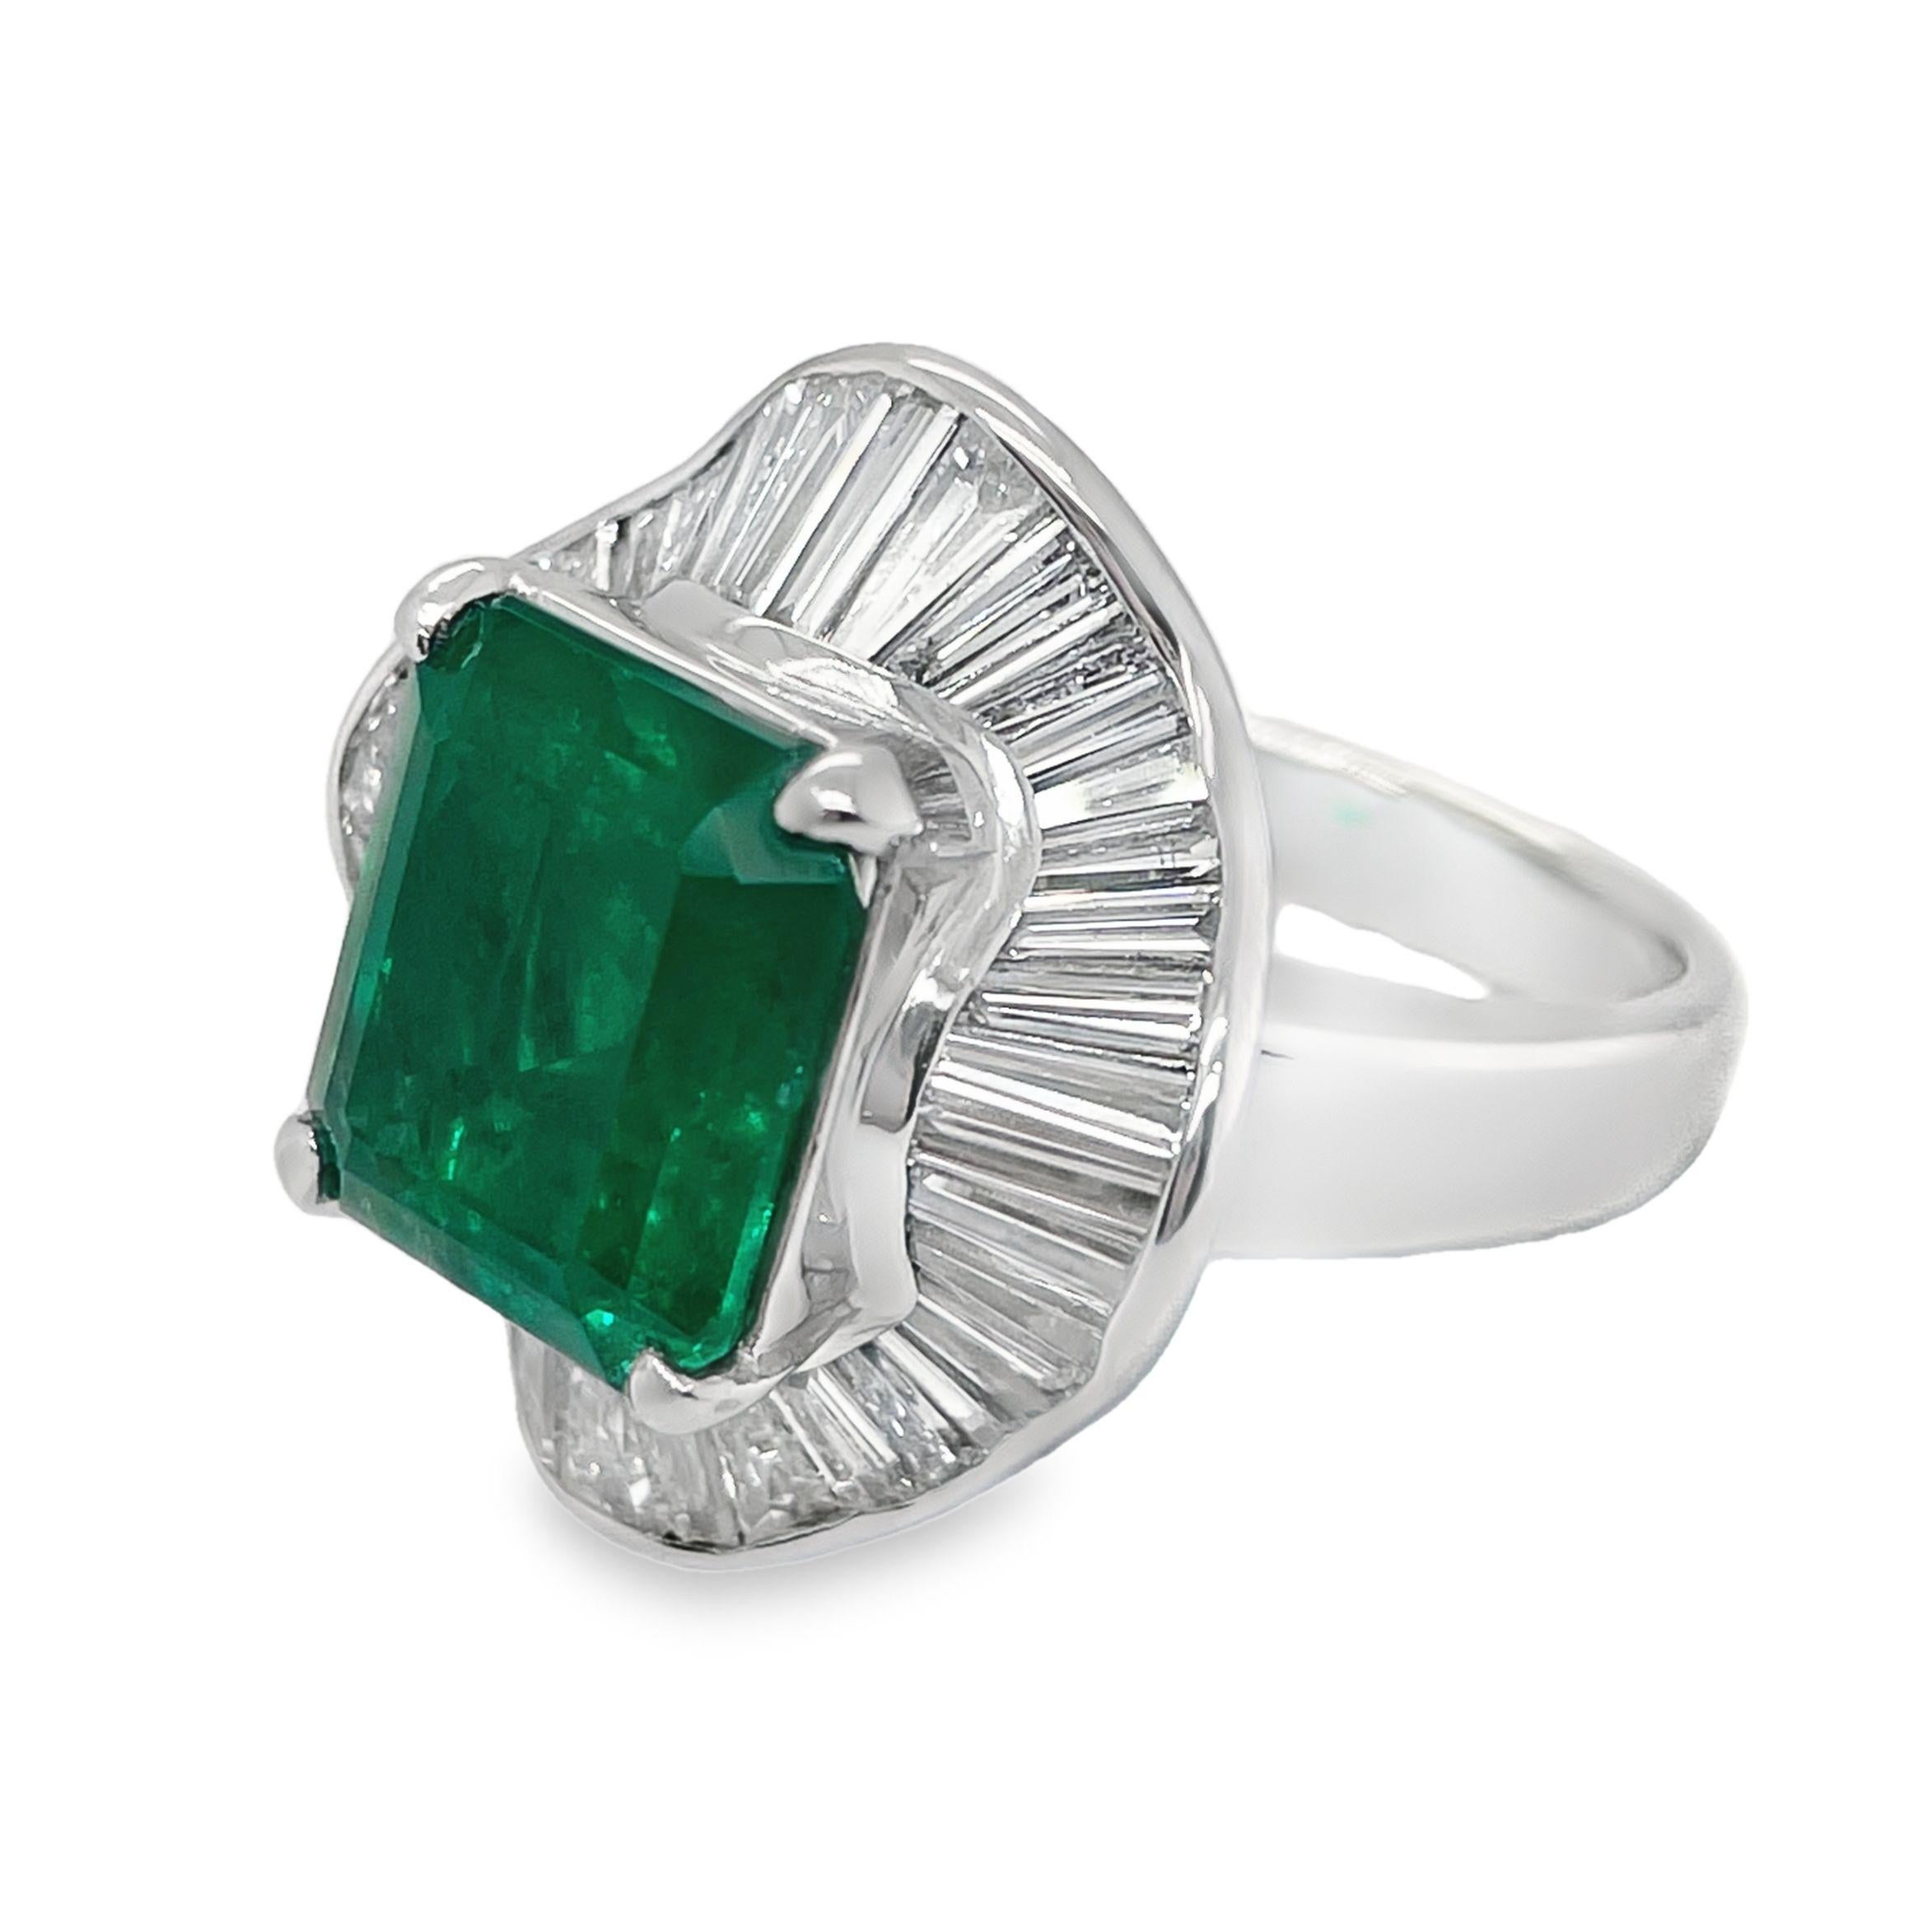 The house of Top Crown Jewelry is presenting a GIA Certified magnificent 6.19-carat Colombian Emerald embraced by 2.47 carats of natural sparkling diamonds, all elegantly housed in a lavish platinum setting. This exquisite piece combines the allure